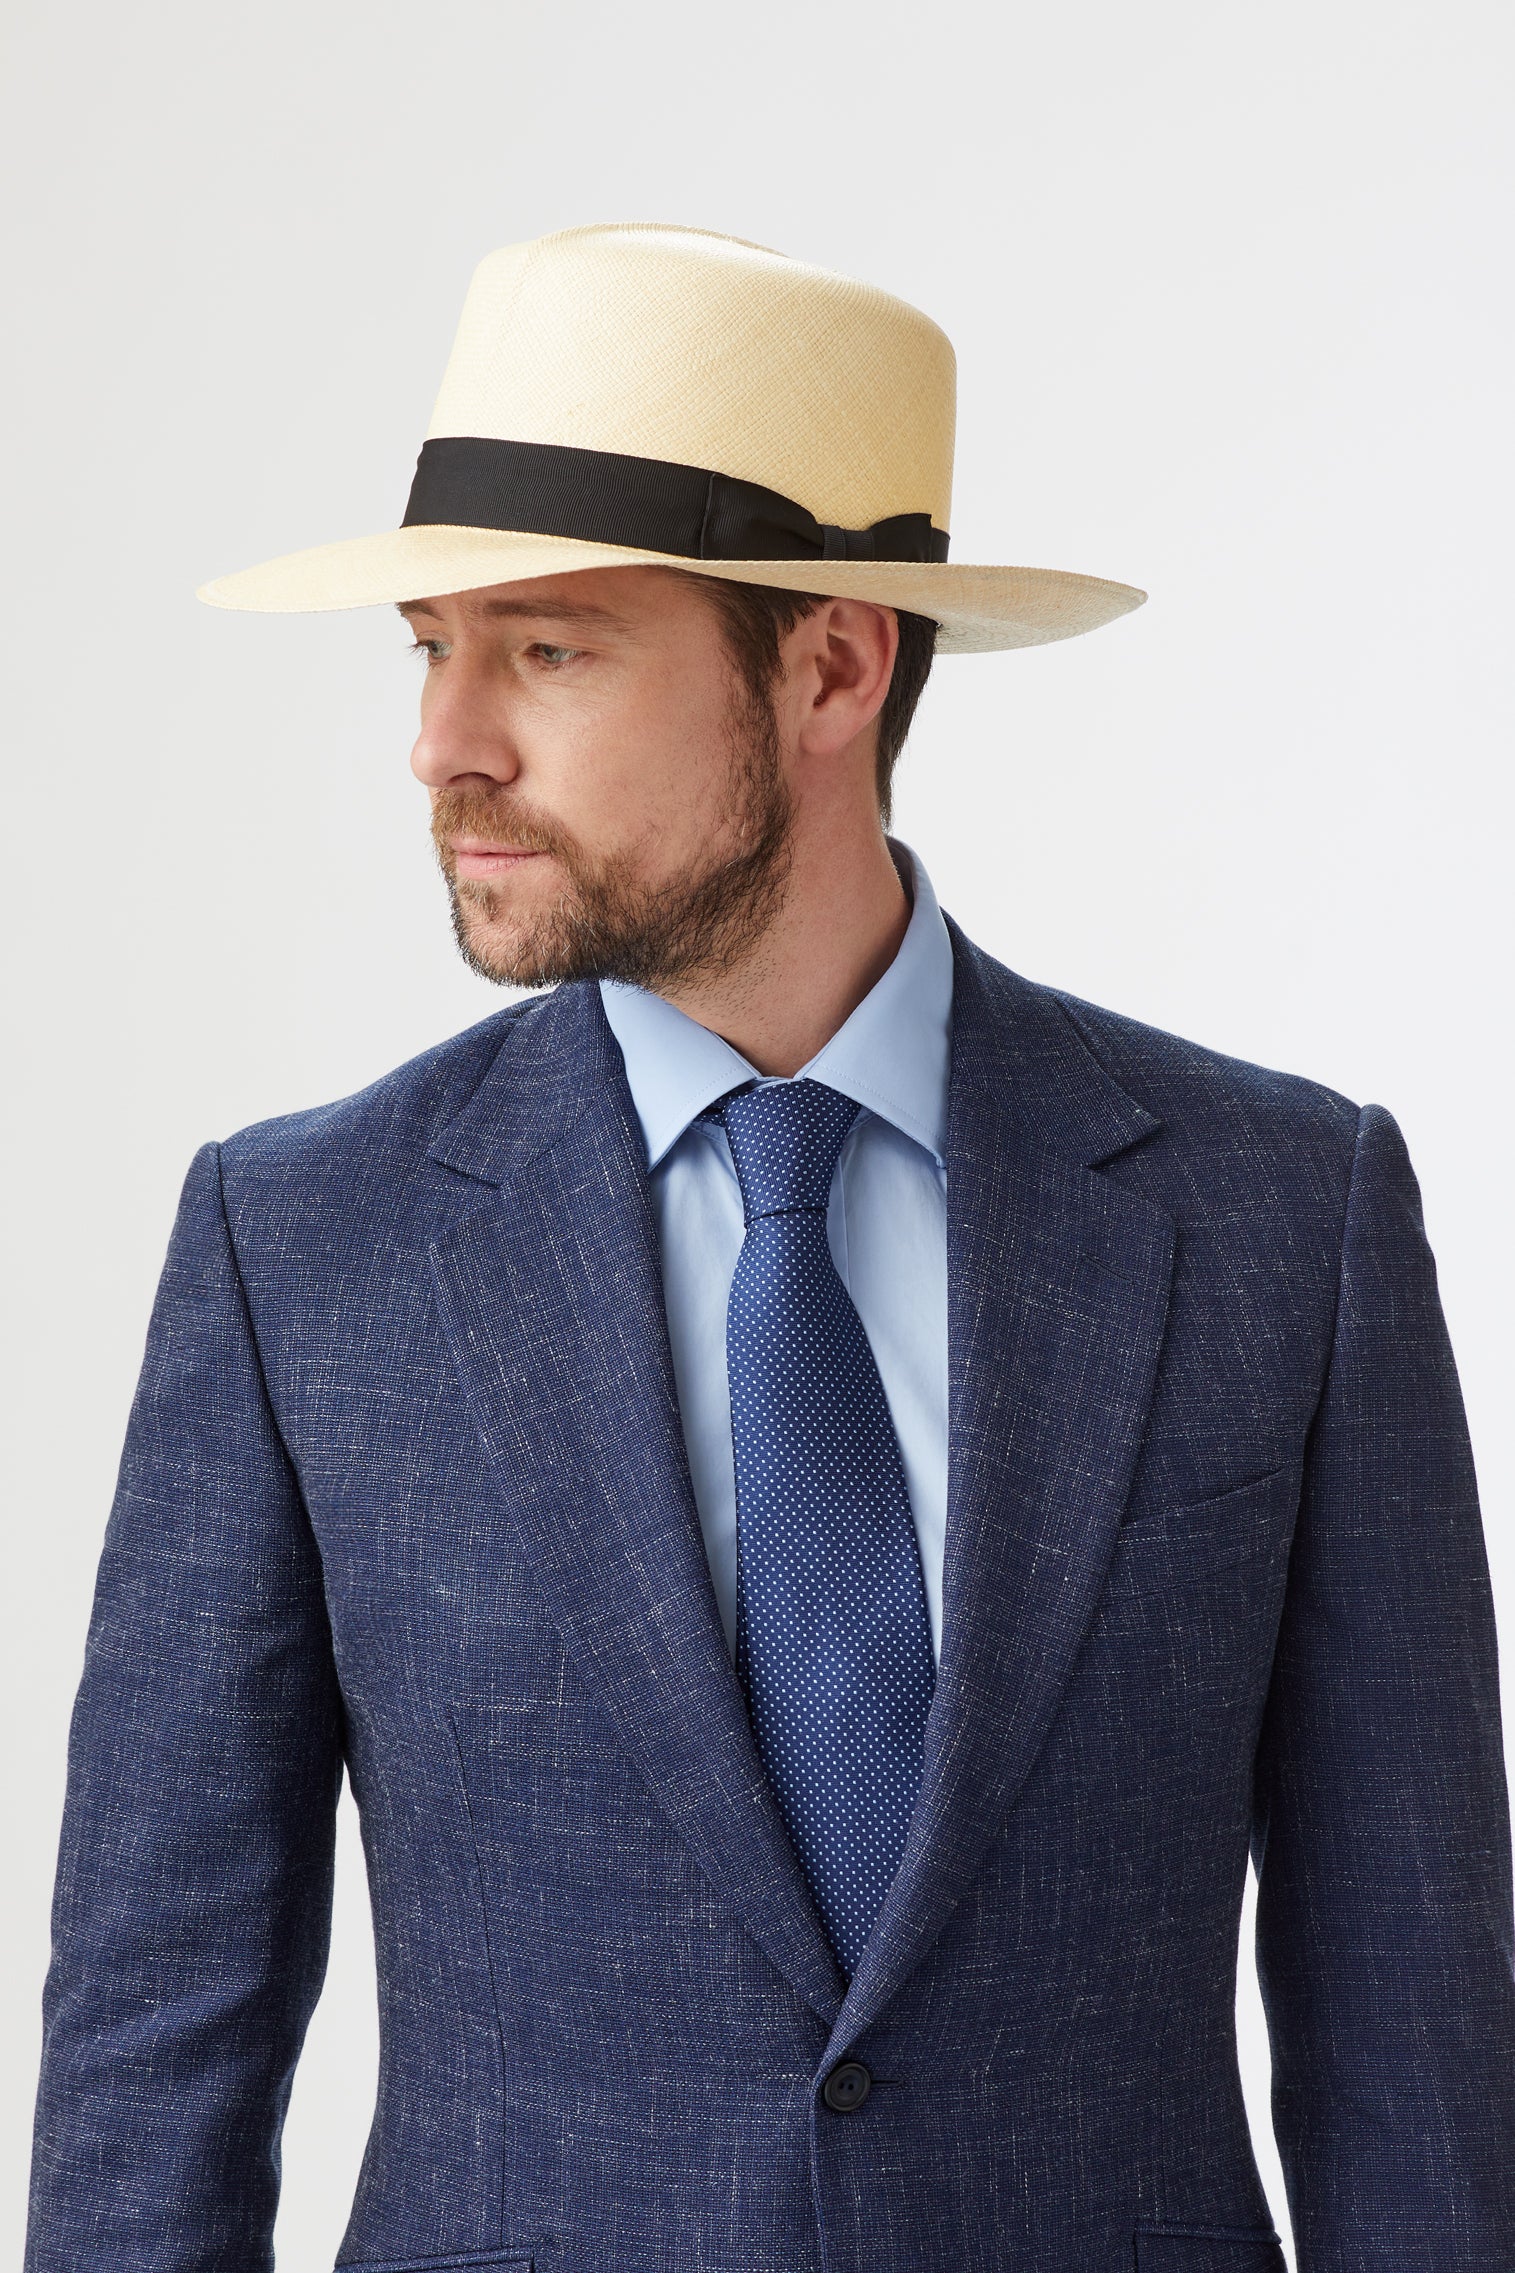 Men's Rollable Panama - Hats for Square Face Shapes - Lock & Co. Hatters London UK